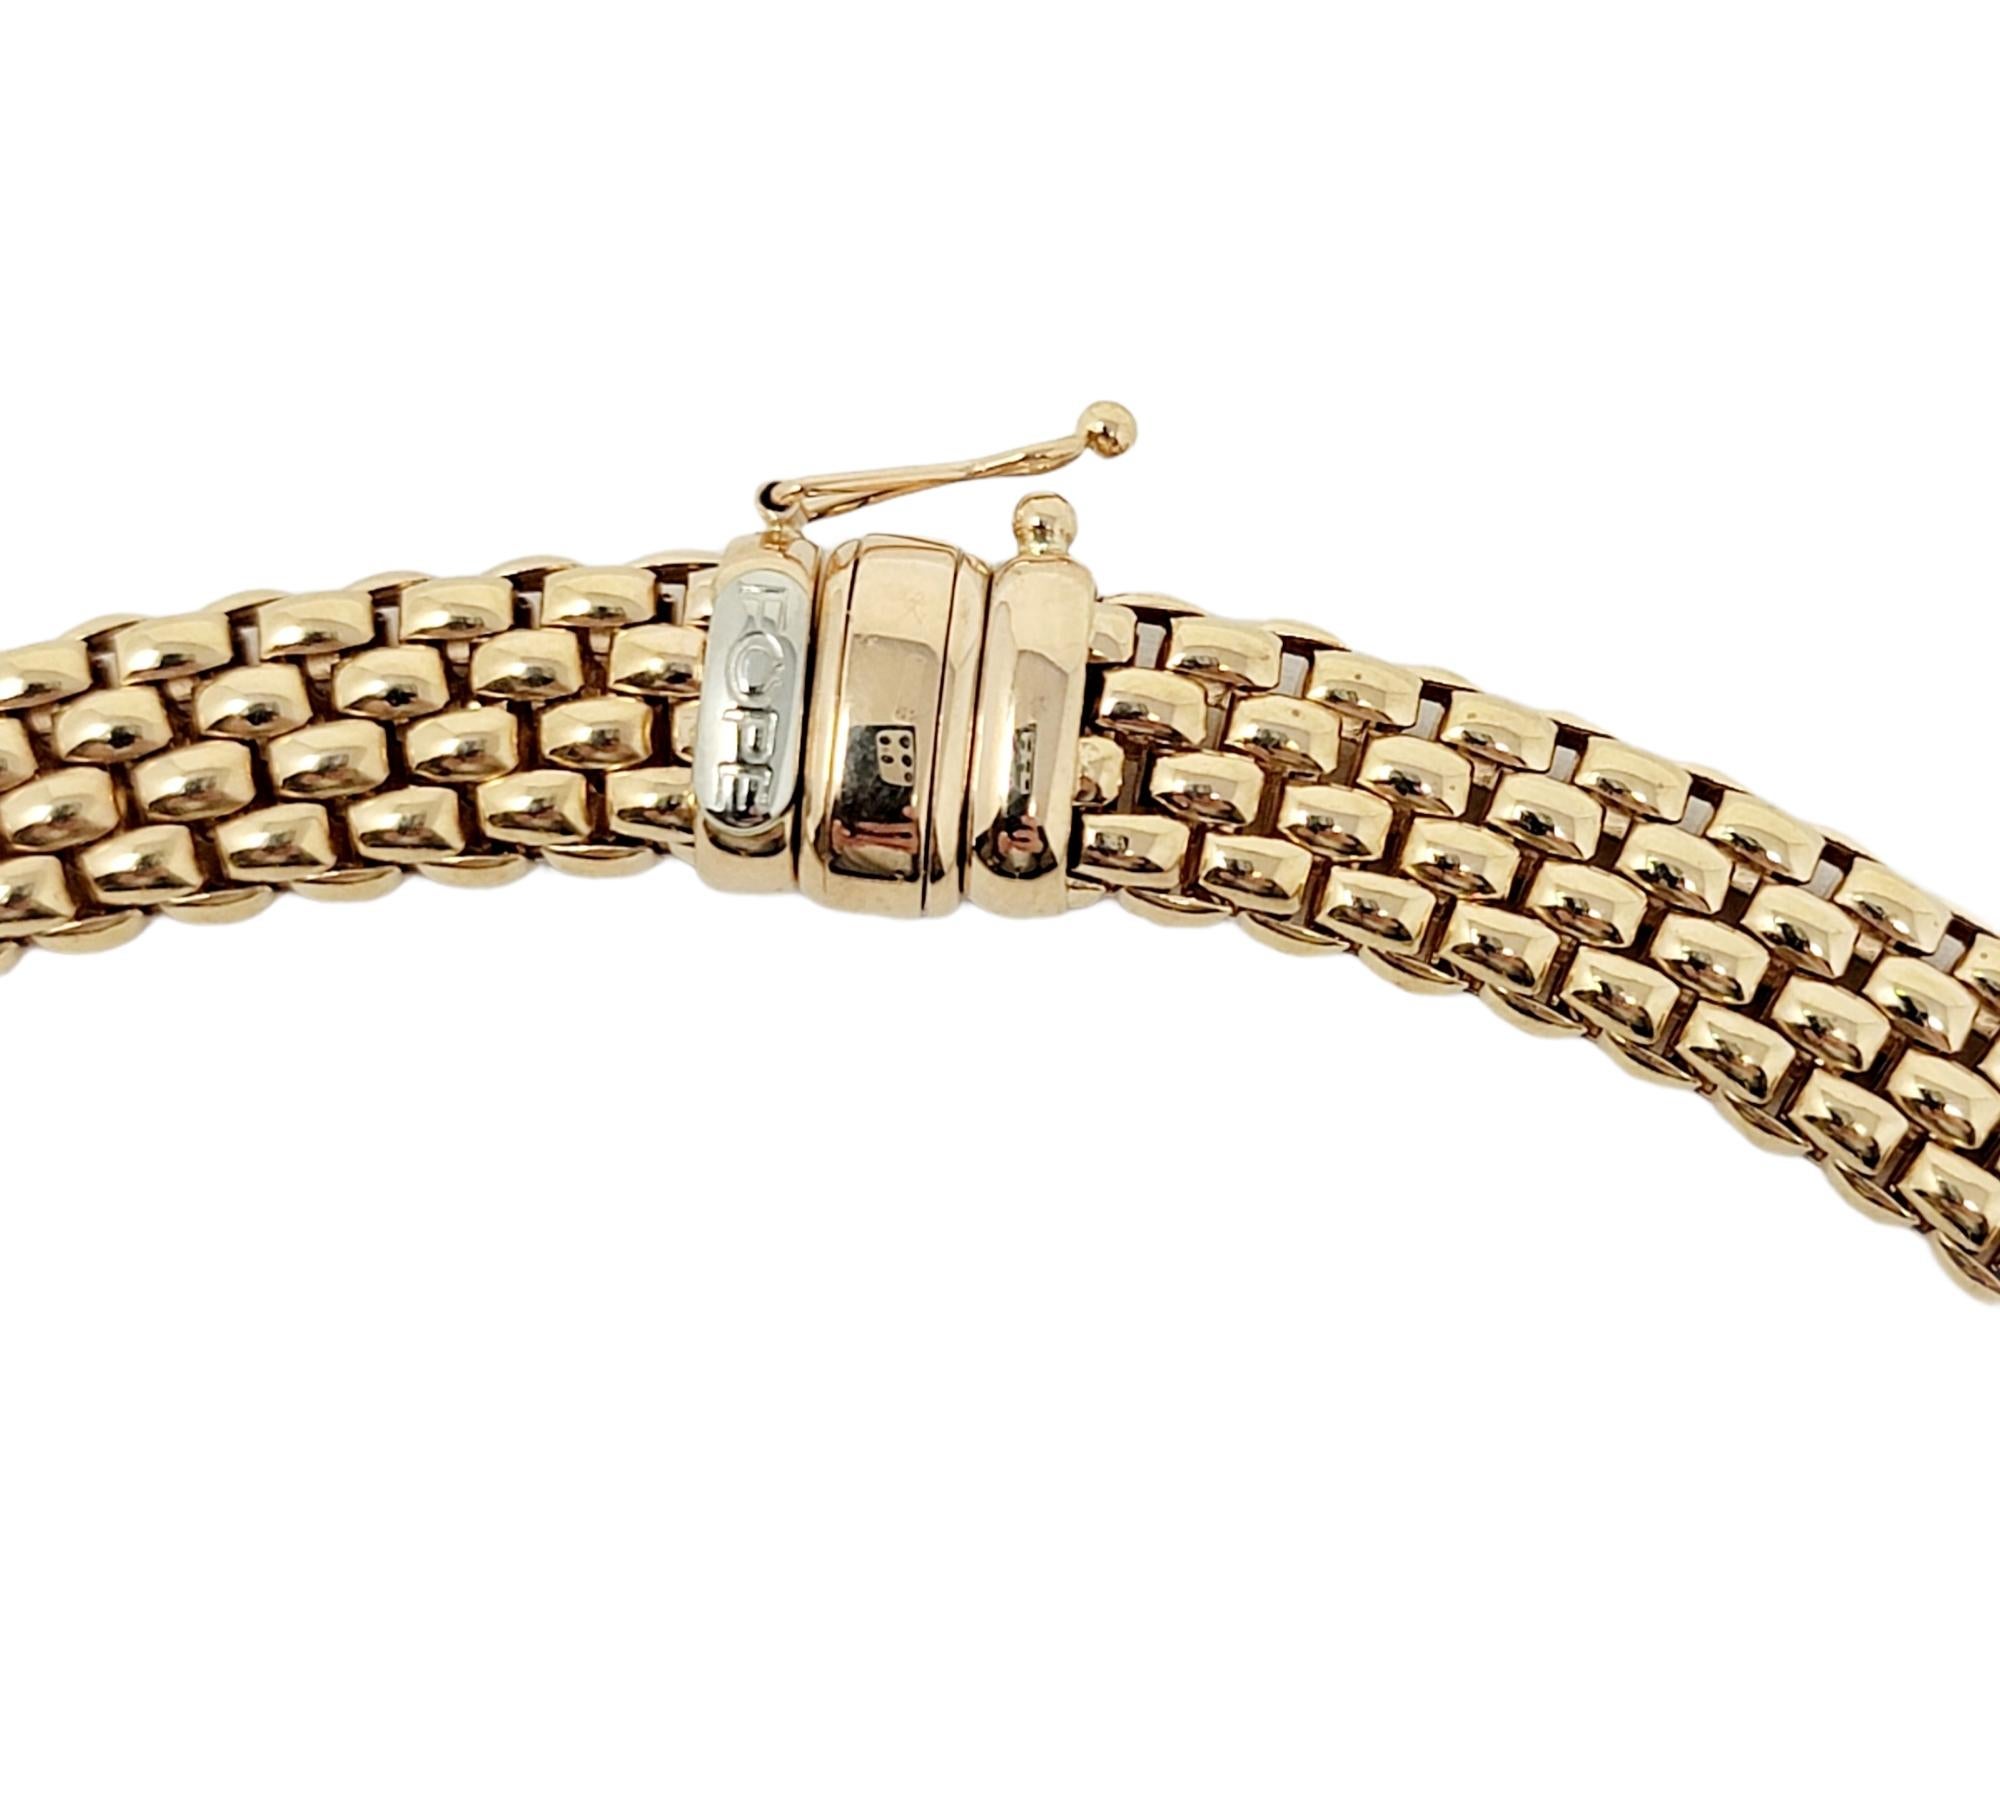 Contemporary Fope Novecento Mesh Tri-Tone 18 Karat Gold and Pave Diamond Necklace .75 Carats For Sale